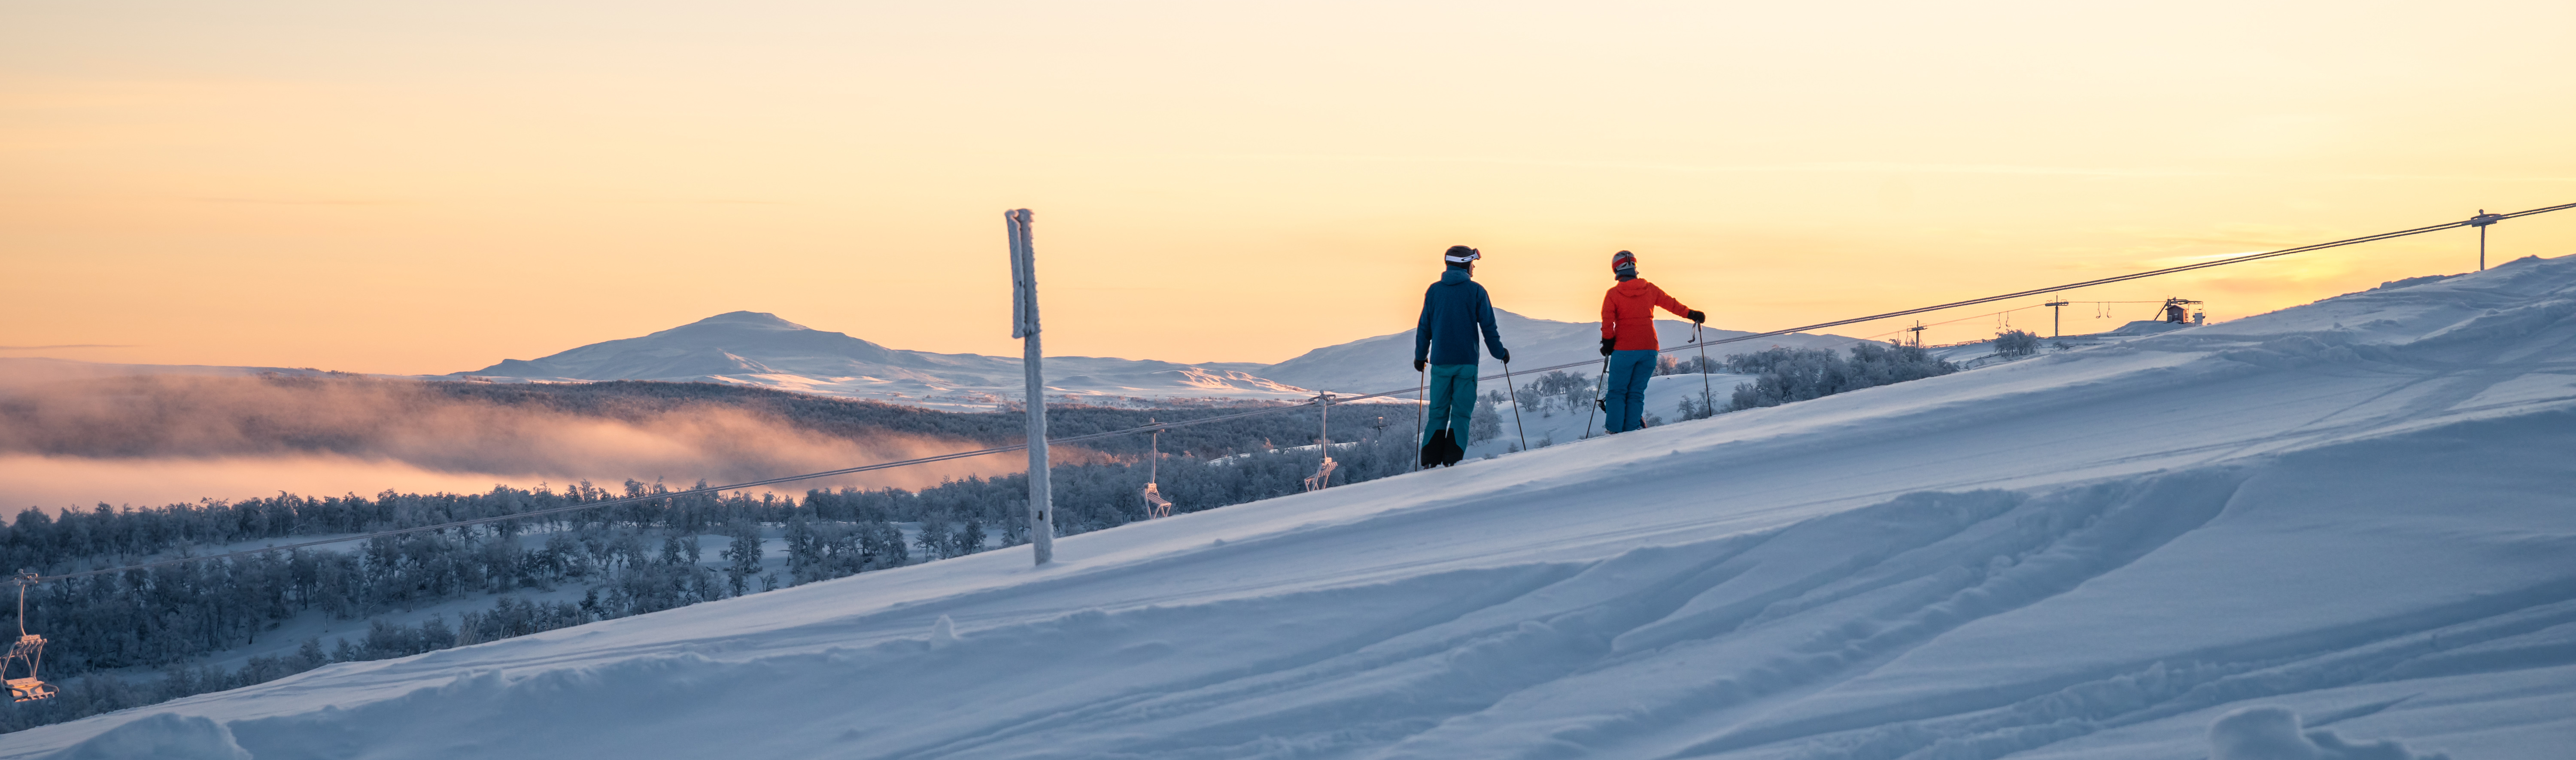 Sunrise at the top of the mountain in Ramundberget